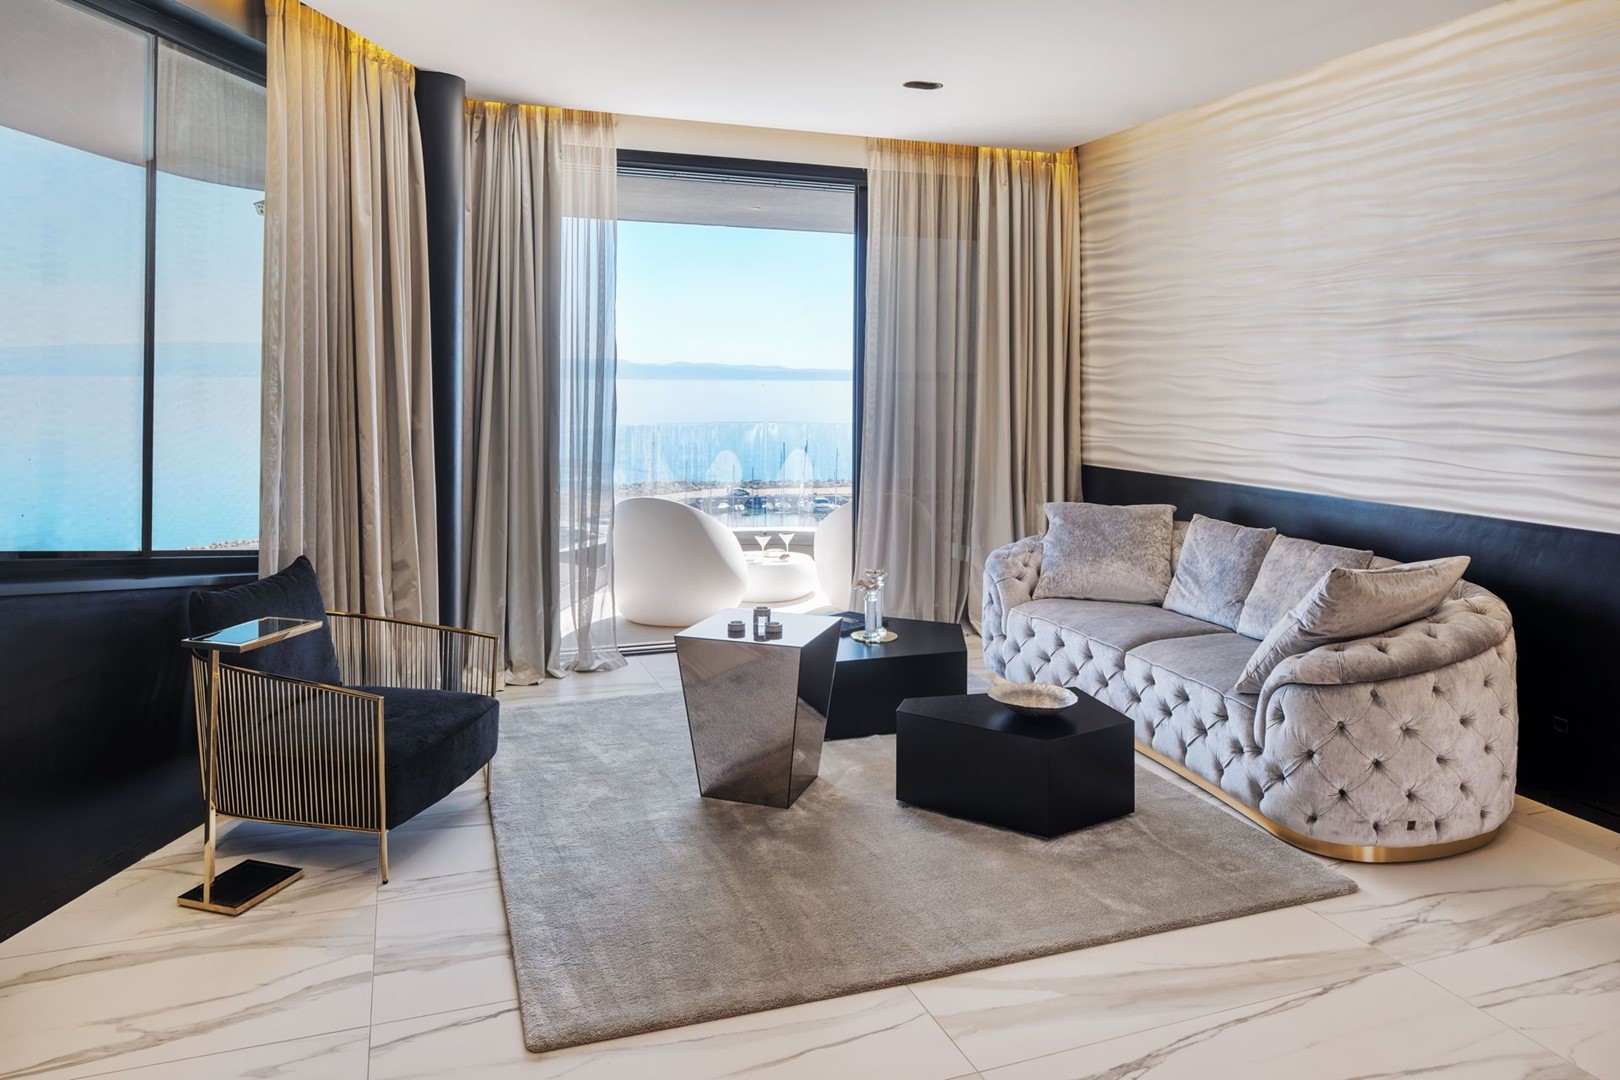 Glamorously decorated living room with a gray comfortable sofa, armchair, coffee table and a view of the harbor in a luxury apartment for rent in Split